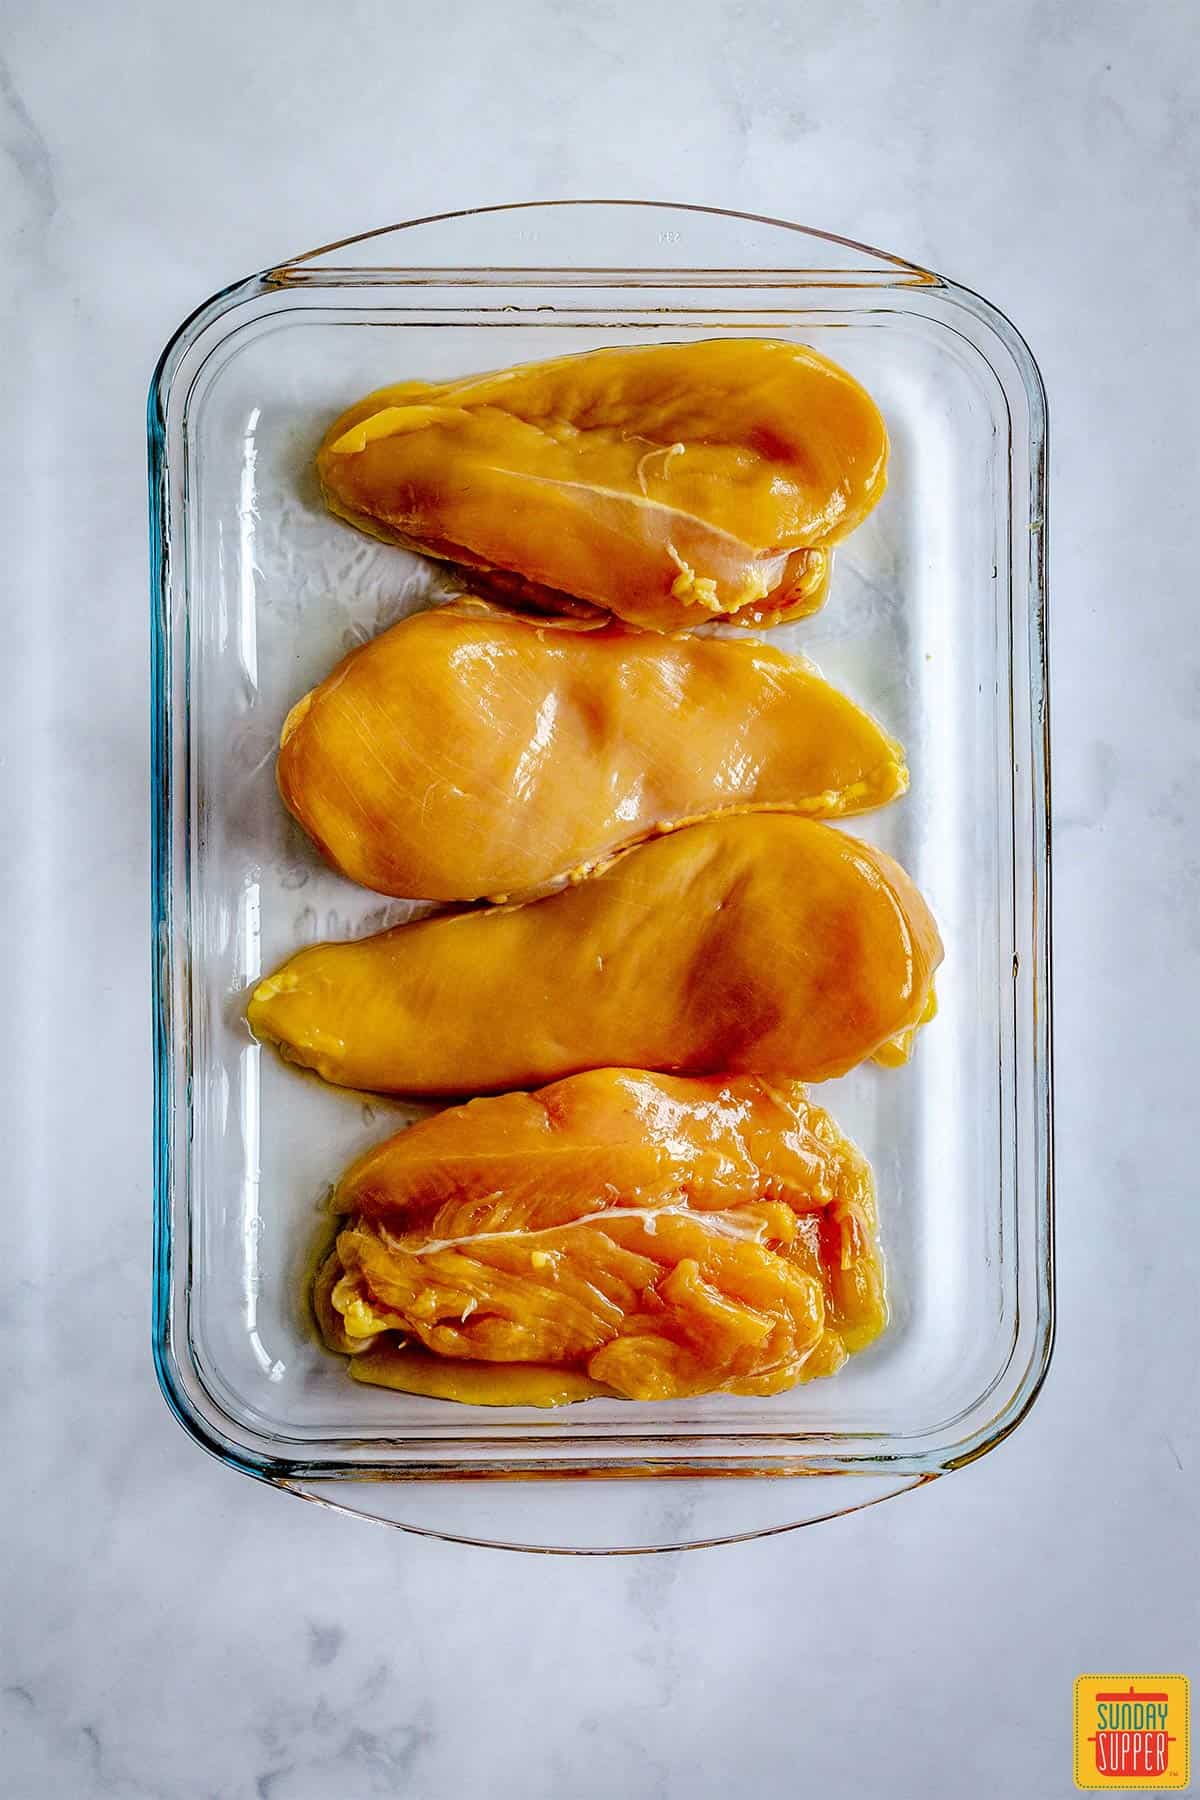 Four chicken breasts in a glass baking dish